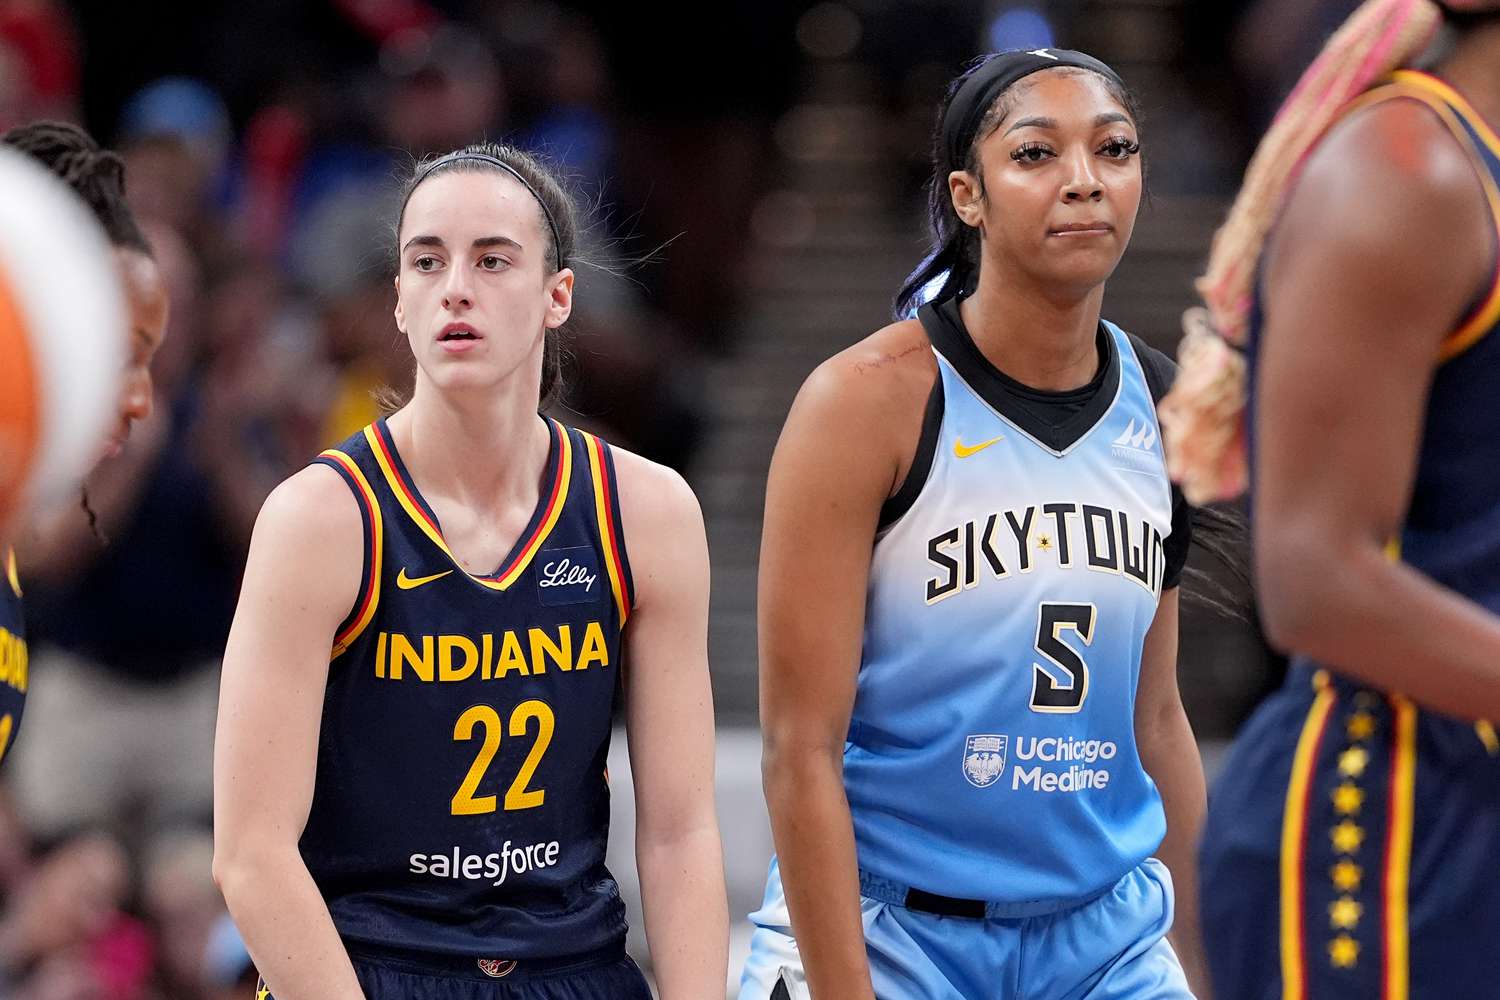 Caitlin Clark and Angel Reese Will Be Teammates for WNBA All-Star Game, Clark Doesn't Want It to Be 'Focal Point'